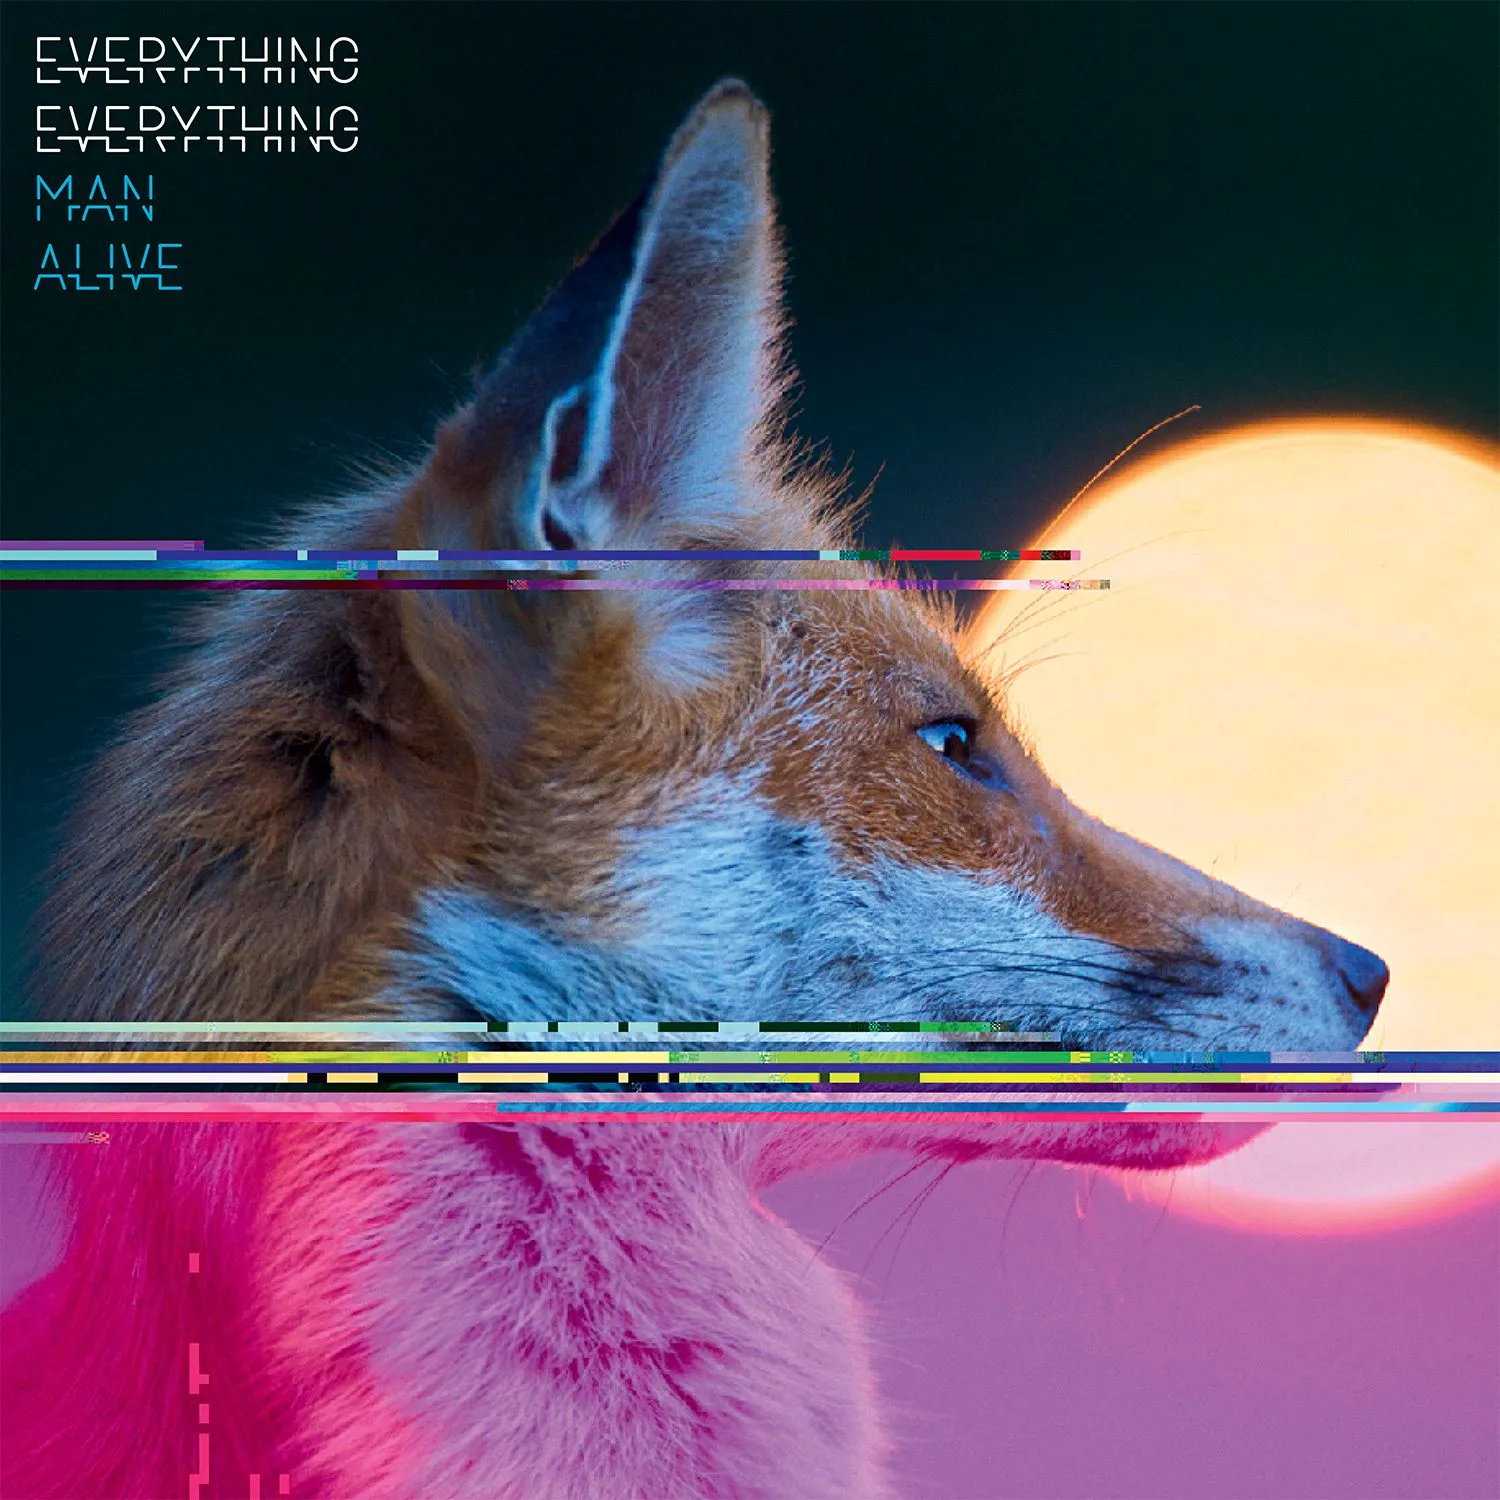 <strong>Everything Everything - Man Alive</strong> (Vinyl LP - black)